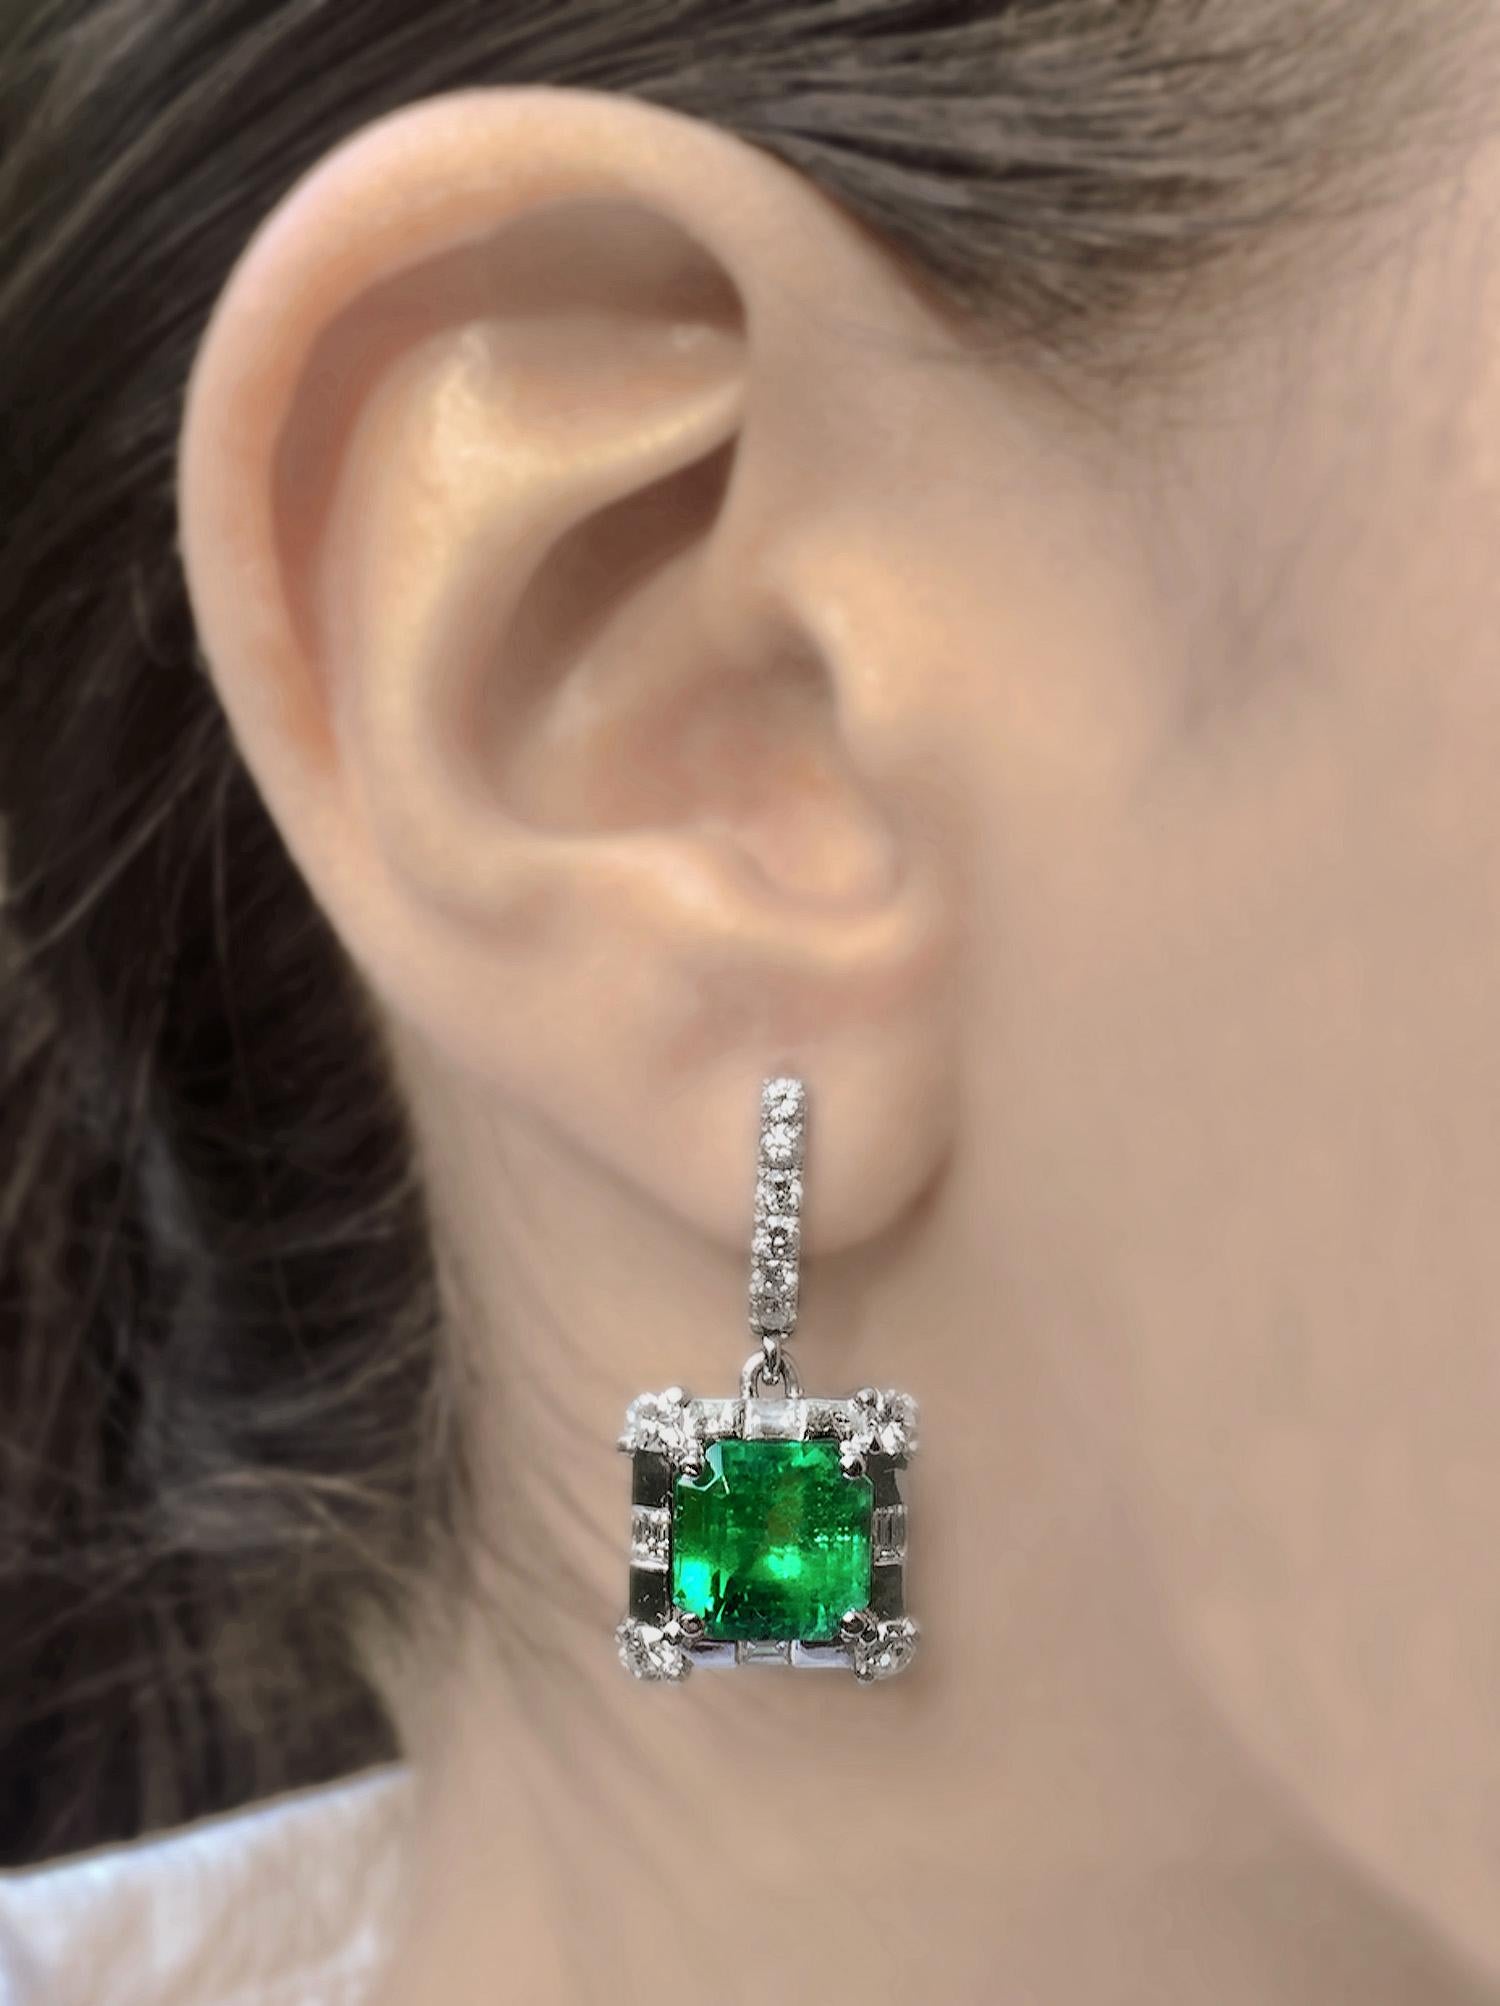 Luxurious  Colombian Emerald Earrings, features two fine square Colombian Emeralds, a total weight of 8.77 Carat, CDTEC Certified. The fine Colombian Emeralds show incredible color, brilliance, and clarity and are surrounded by approx. 2.00 Carats